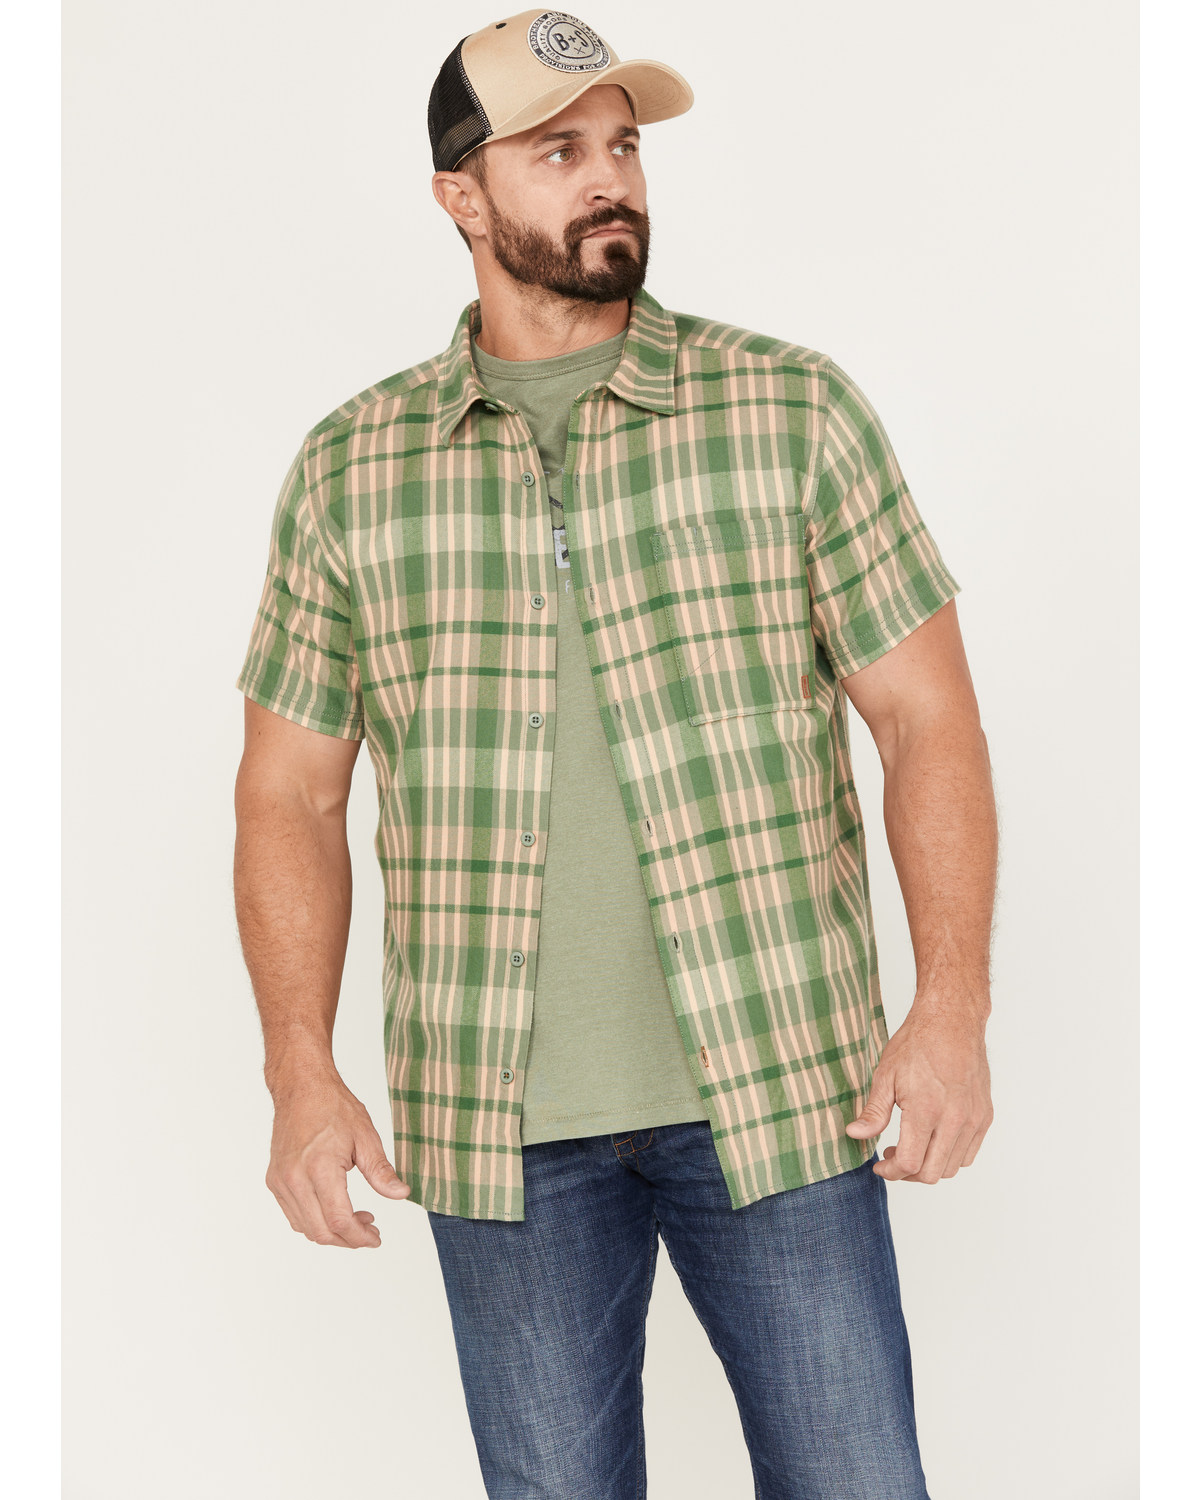 Brothers and Sons Men's Plaid Print Short Sleeve Button-Down Western Shirt